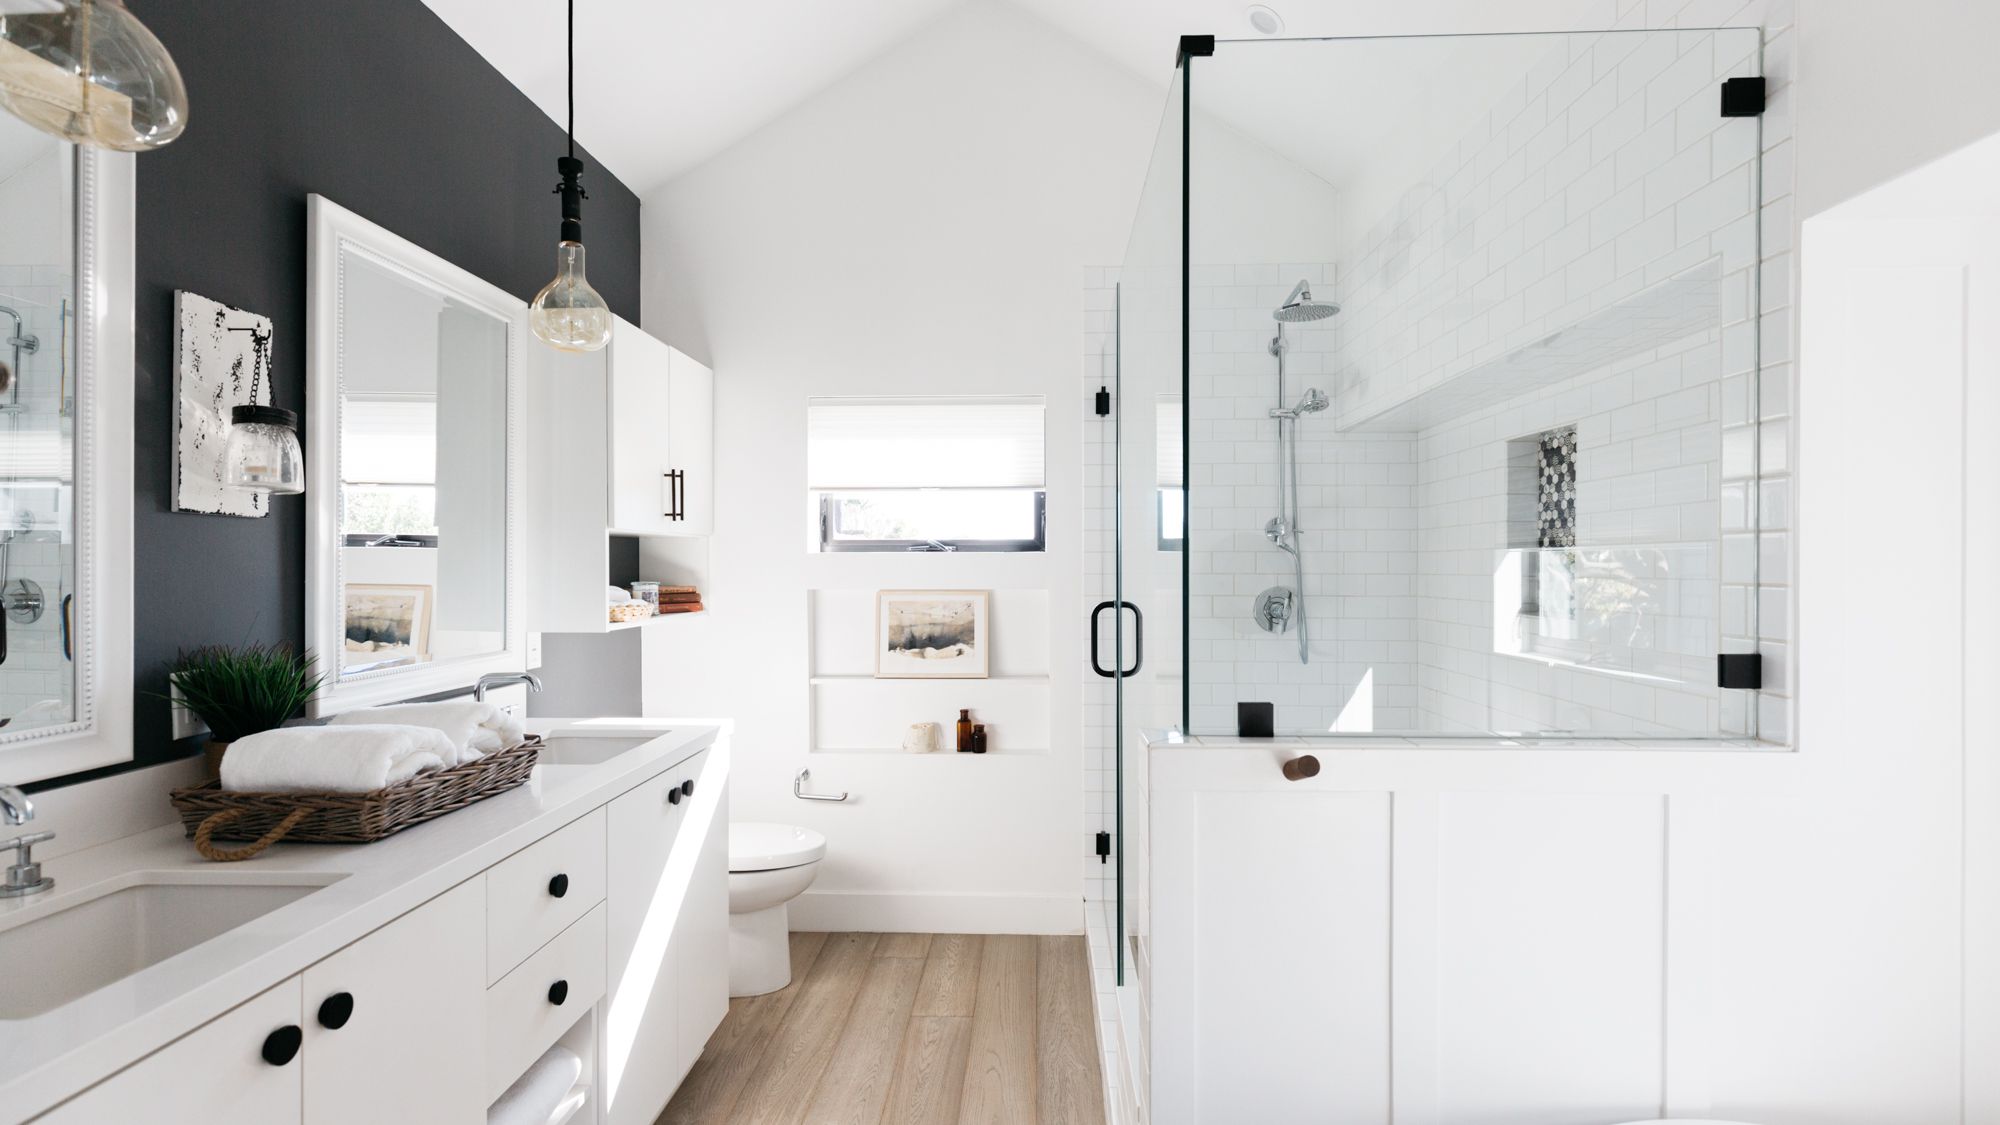 How to Choose the Right Bathroom Design for Your Home